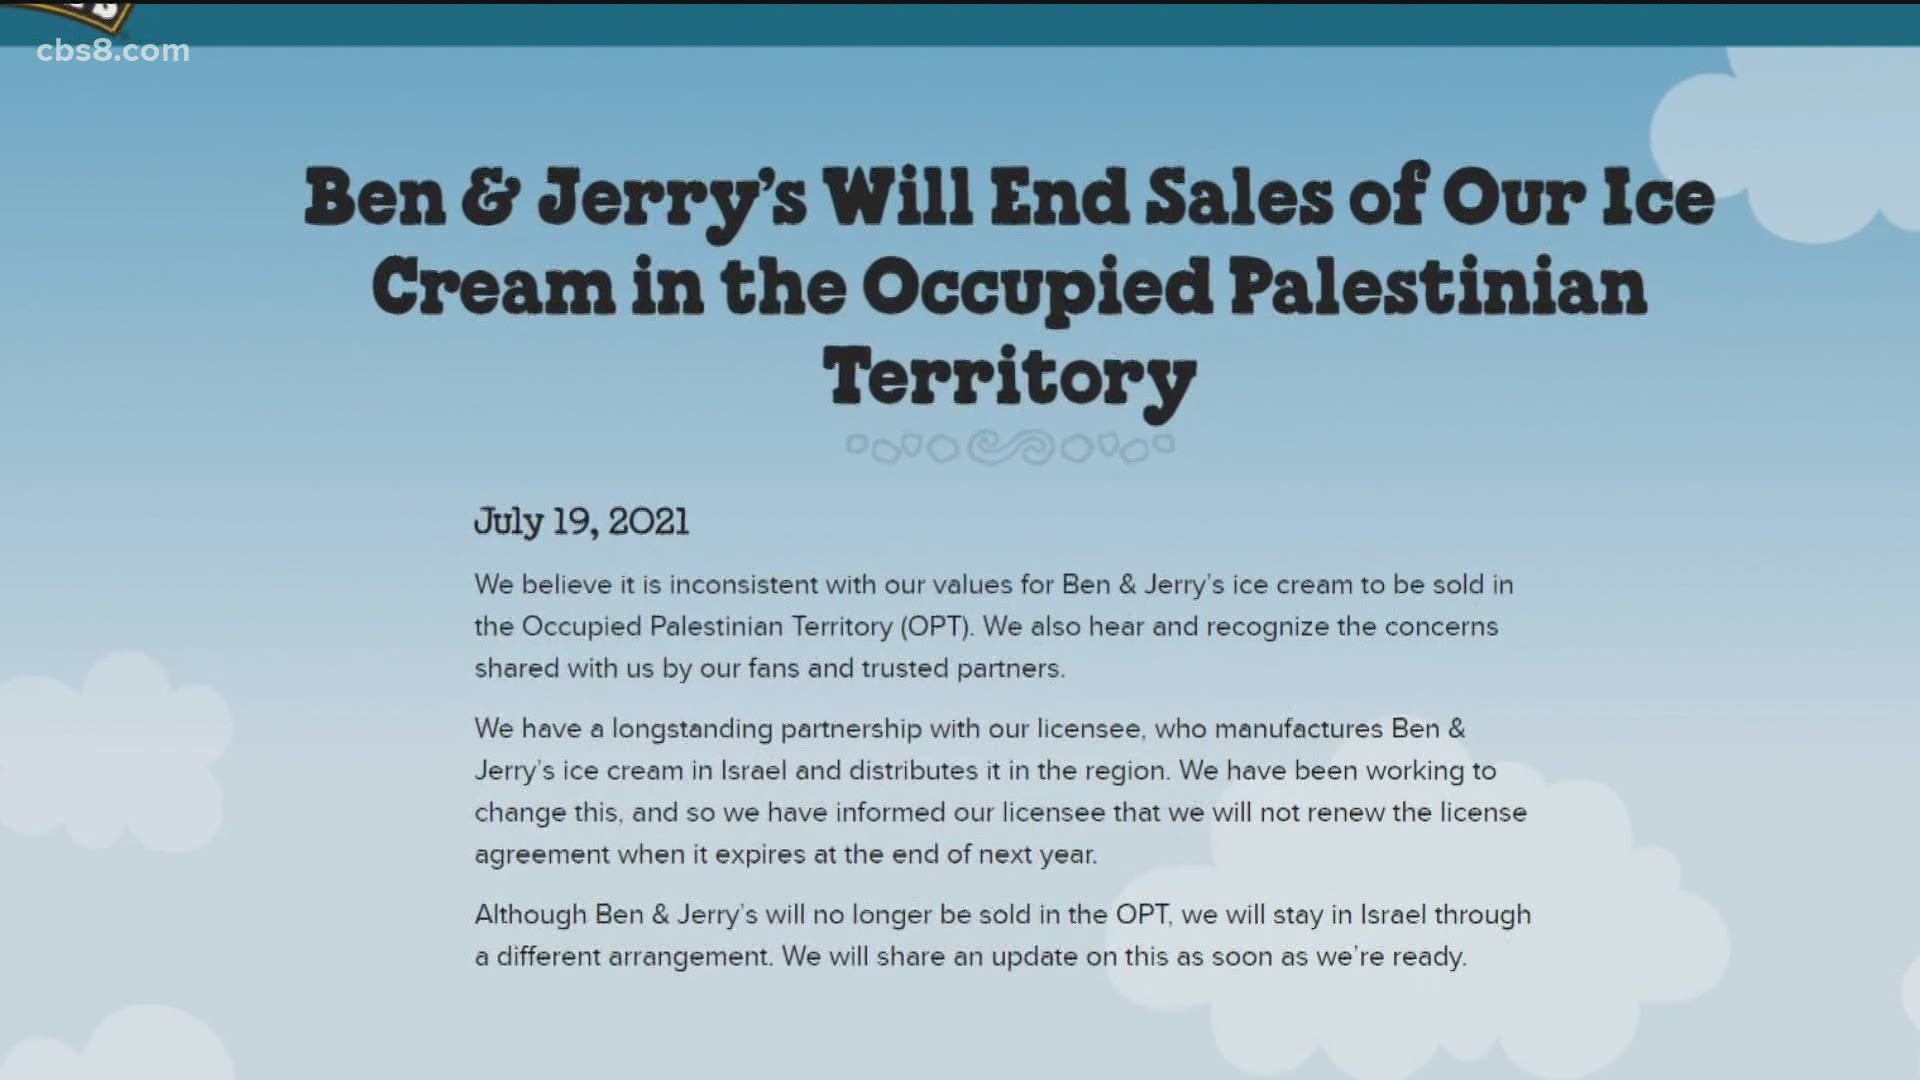 Stand With Us says it has garnered more than 10,000 signatures world-wide to urge Ben and Jerry's to reconsider and promote peace